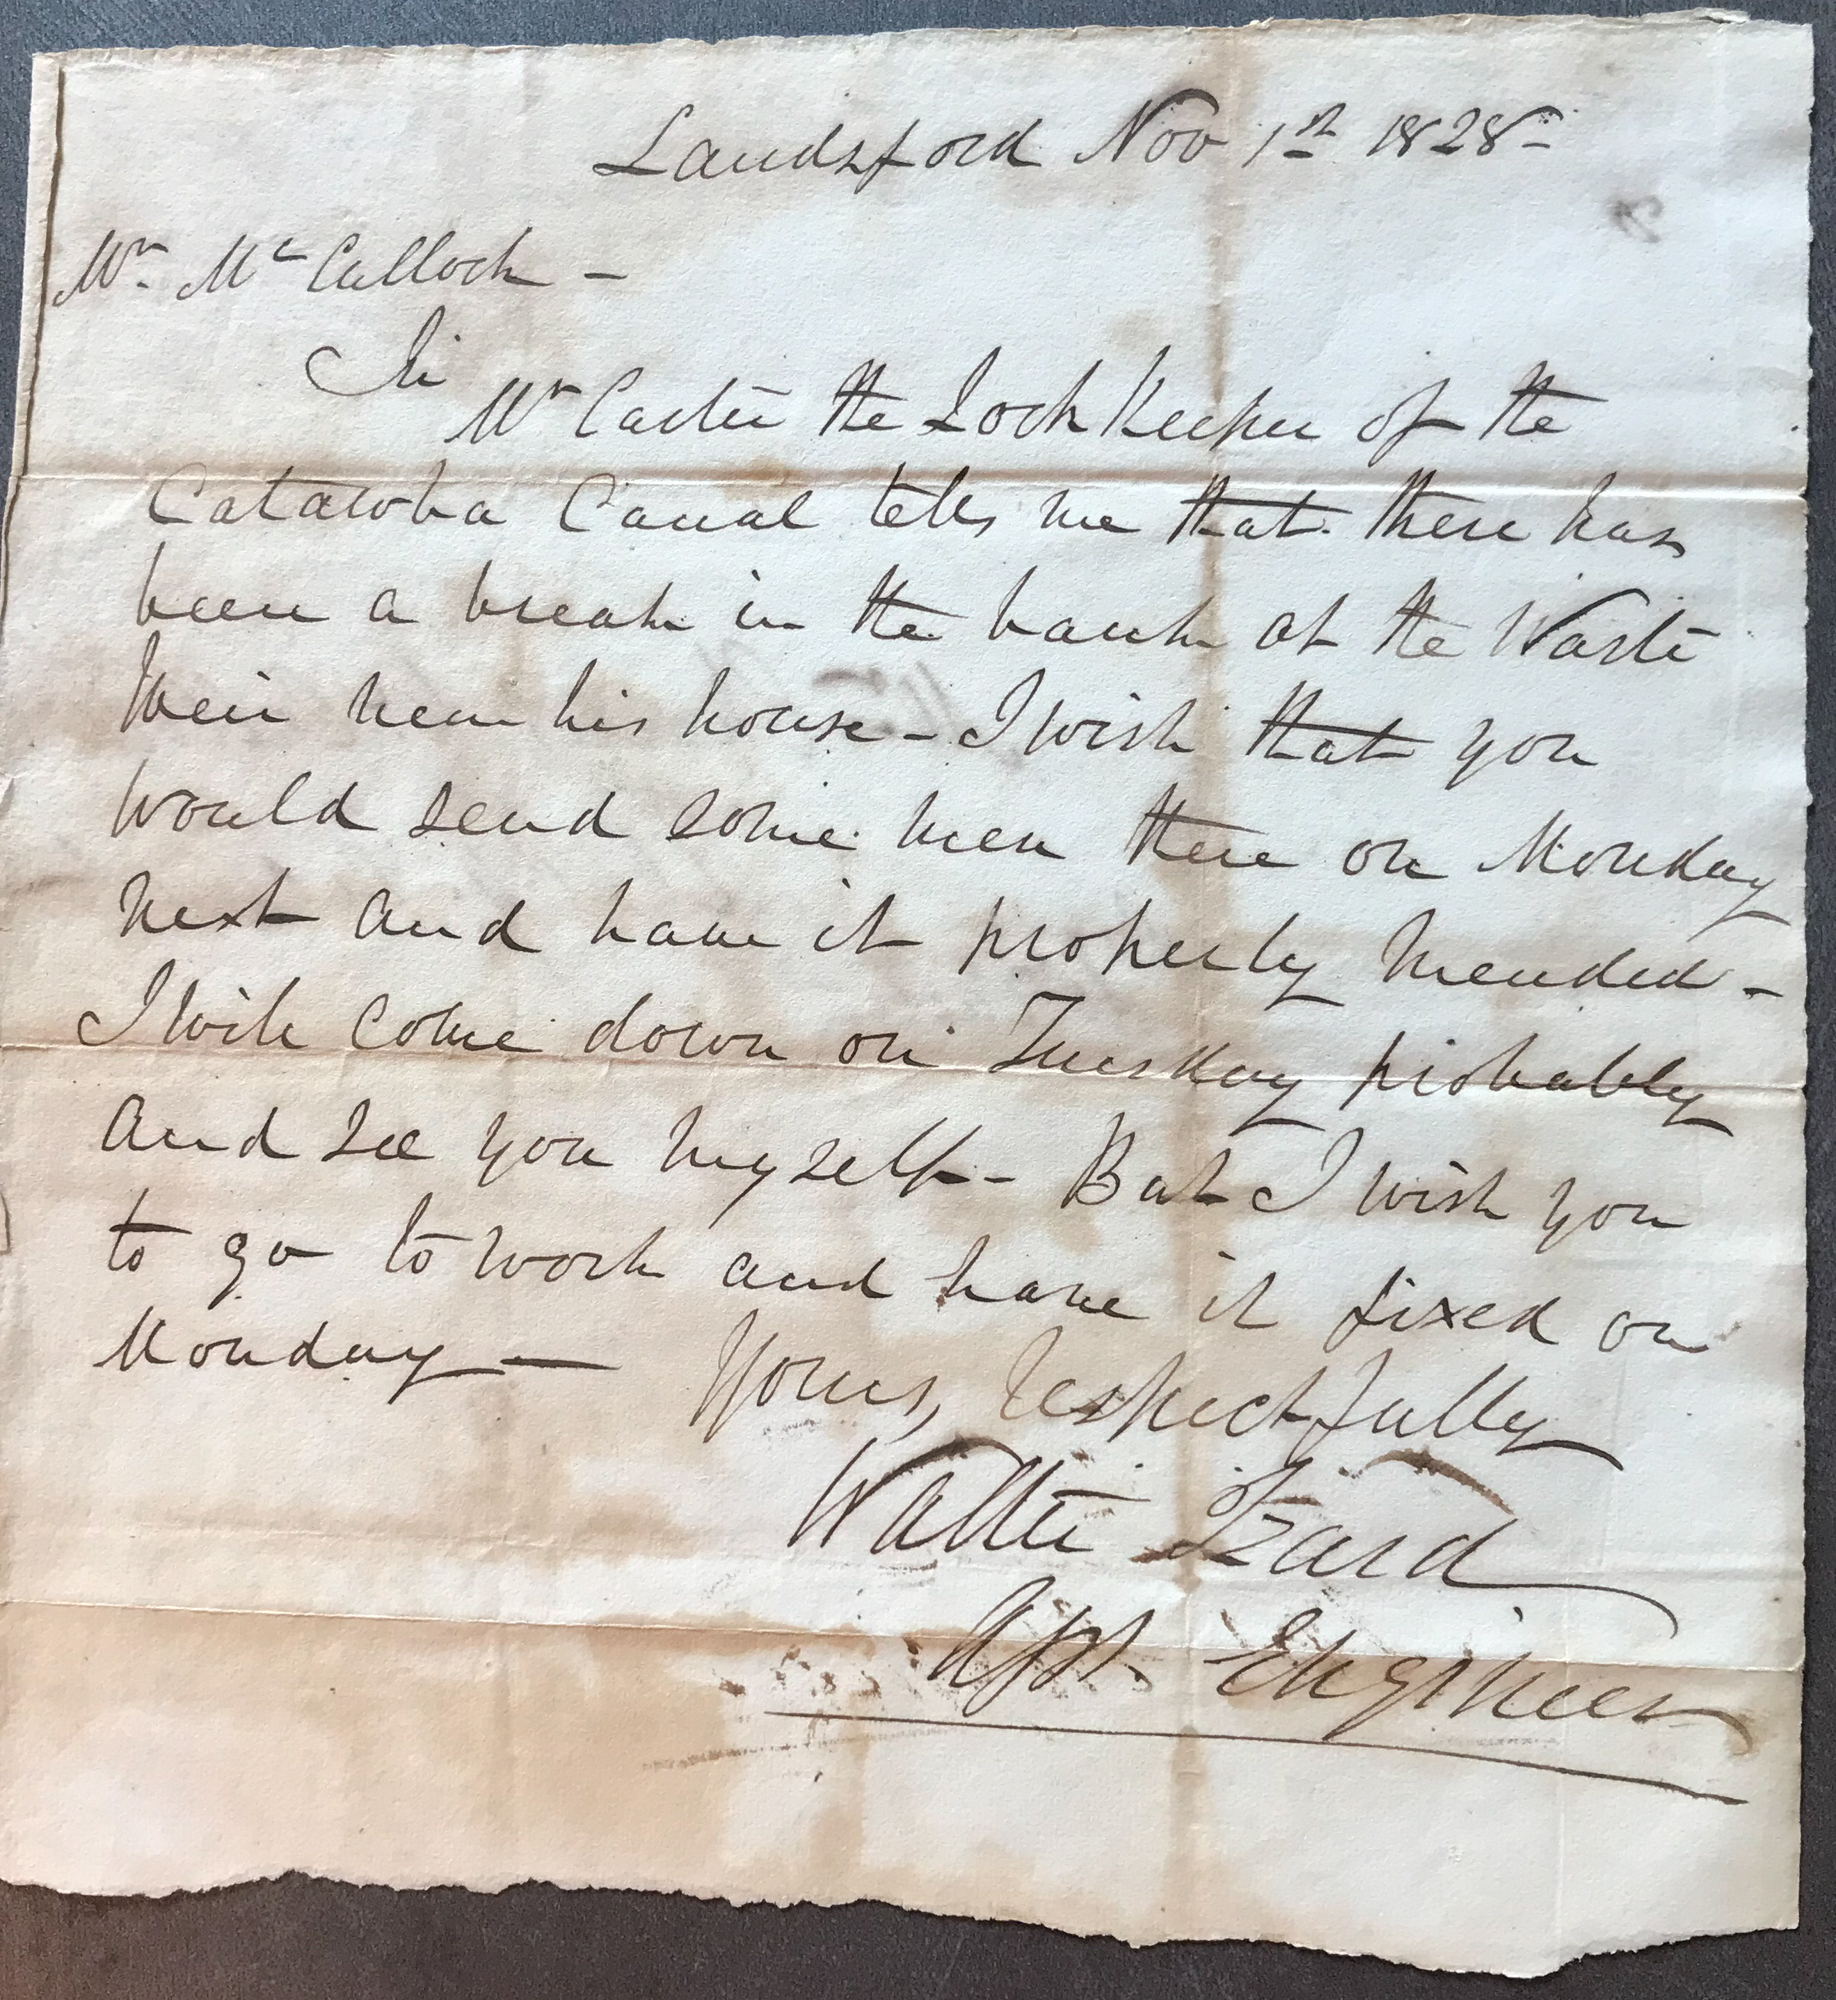 WM. CARTER'S REQUEST FOR REPAIRS @ FISHING CREEK CANAL - 1828